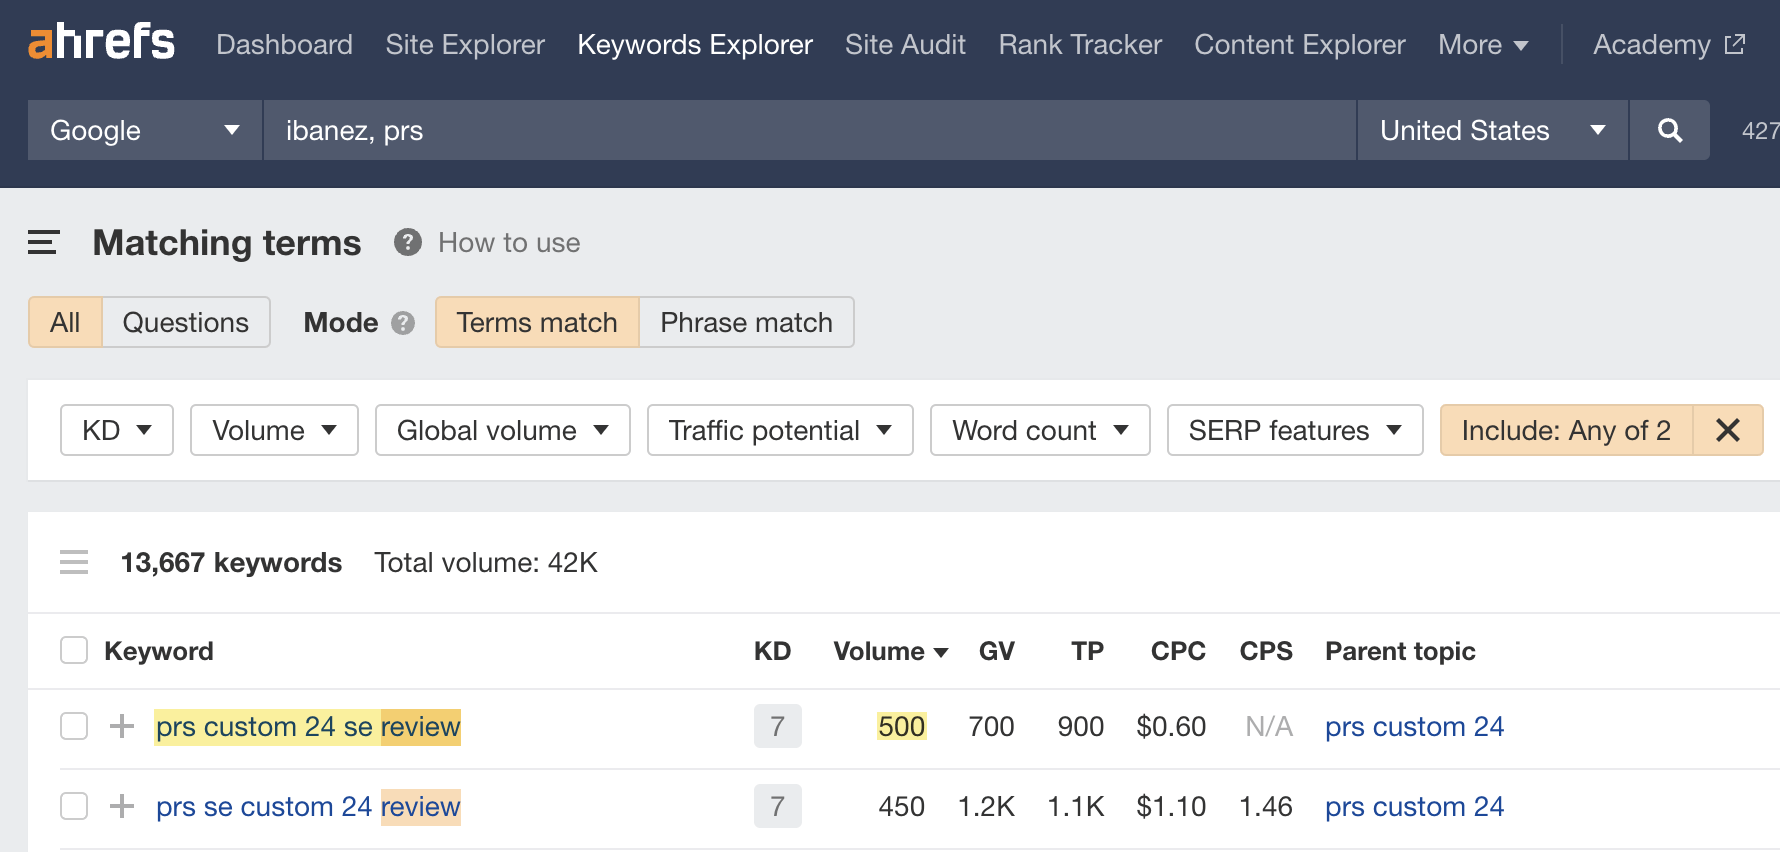 Finding review and "vs" keywords in Keywords Explorer
